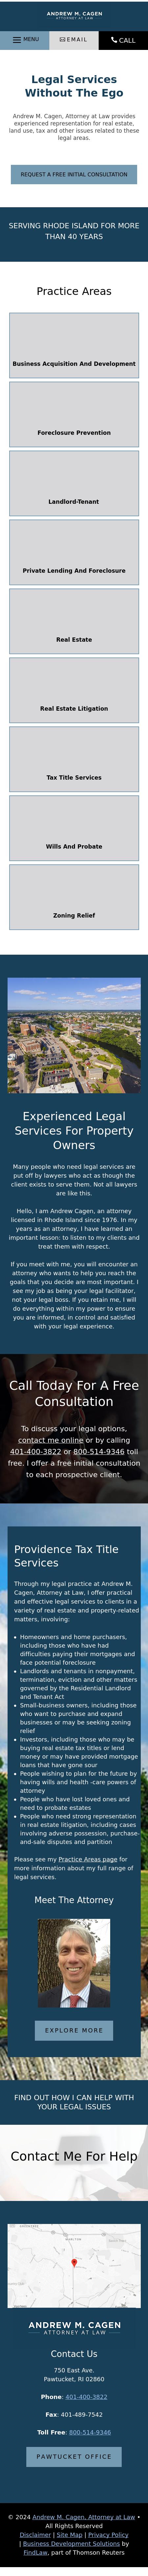 Andrew M. Cagen, Attorney at Law - Providence RI Lawyers